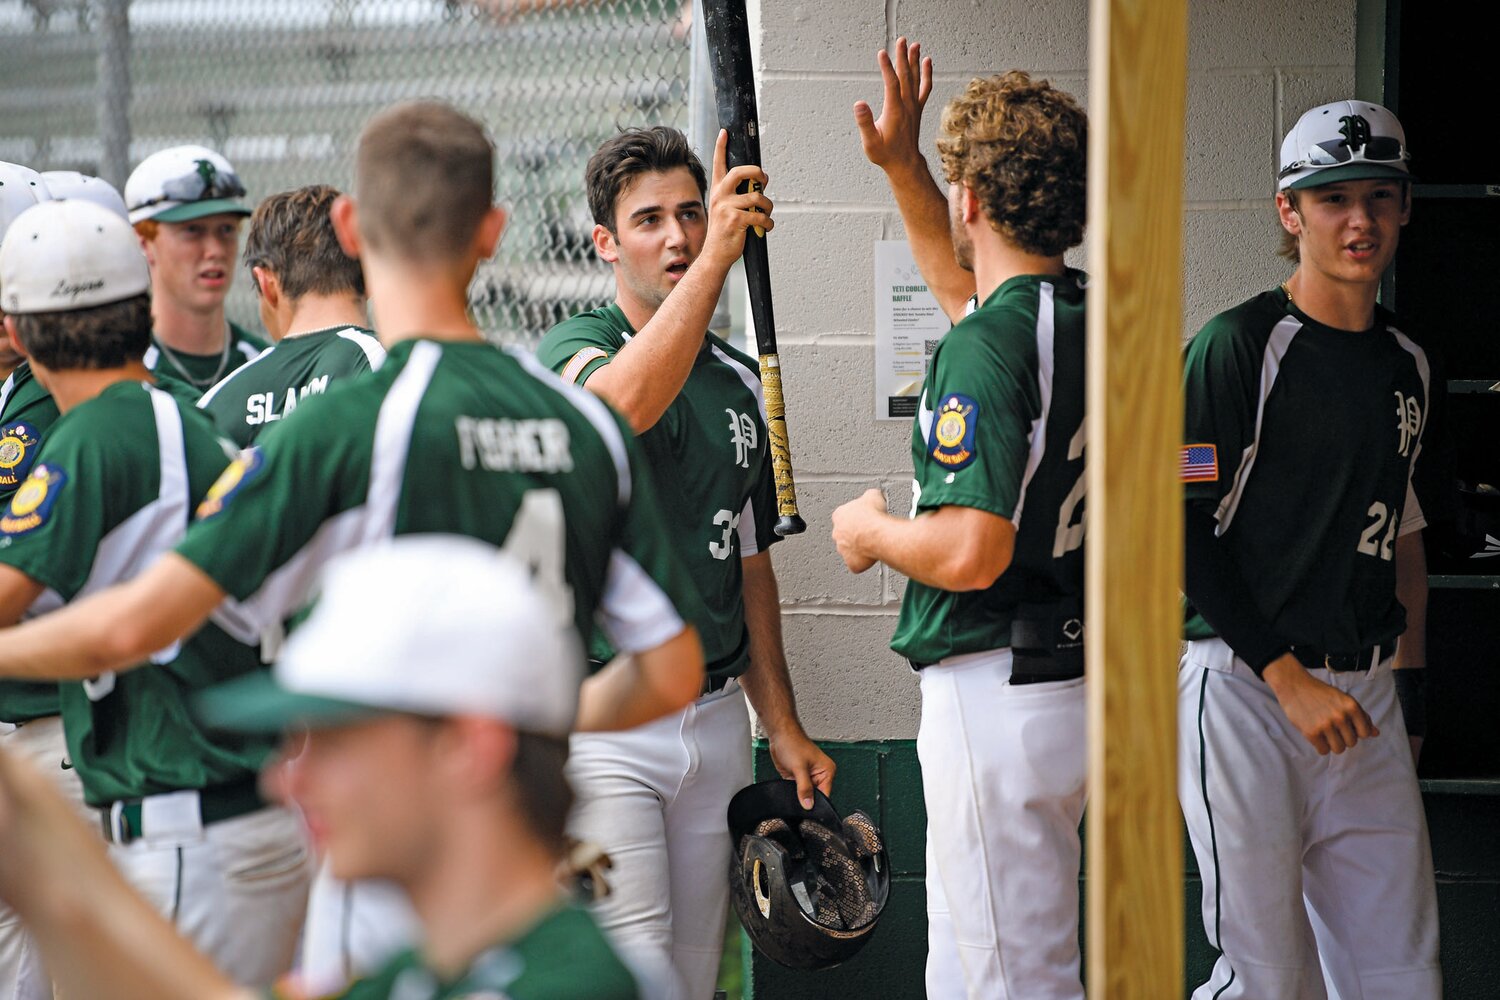 It was all high-fives after Pennridge’s Ryan Hass scored the ninth run in a 10-0 pasting of Nor-Gwyn.